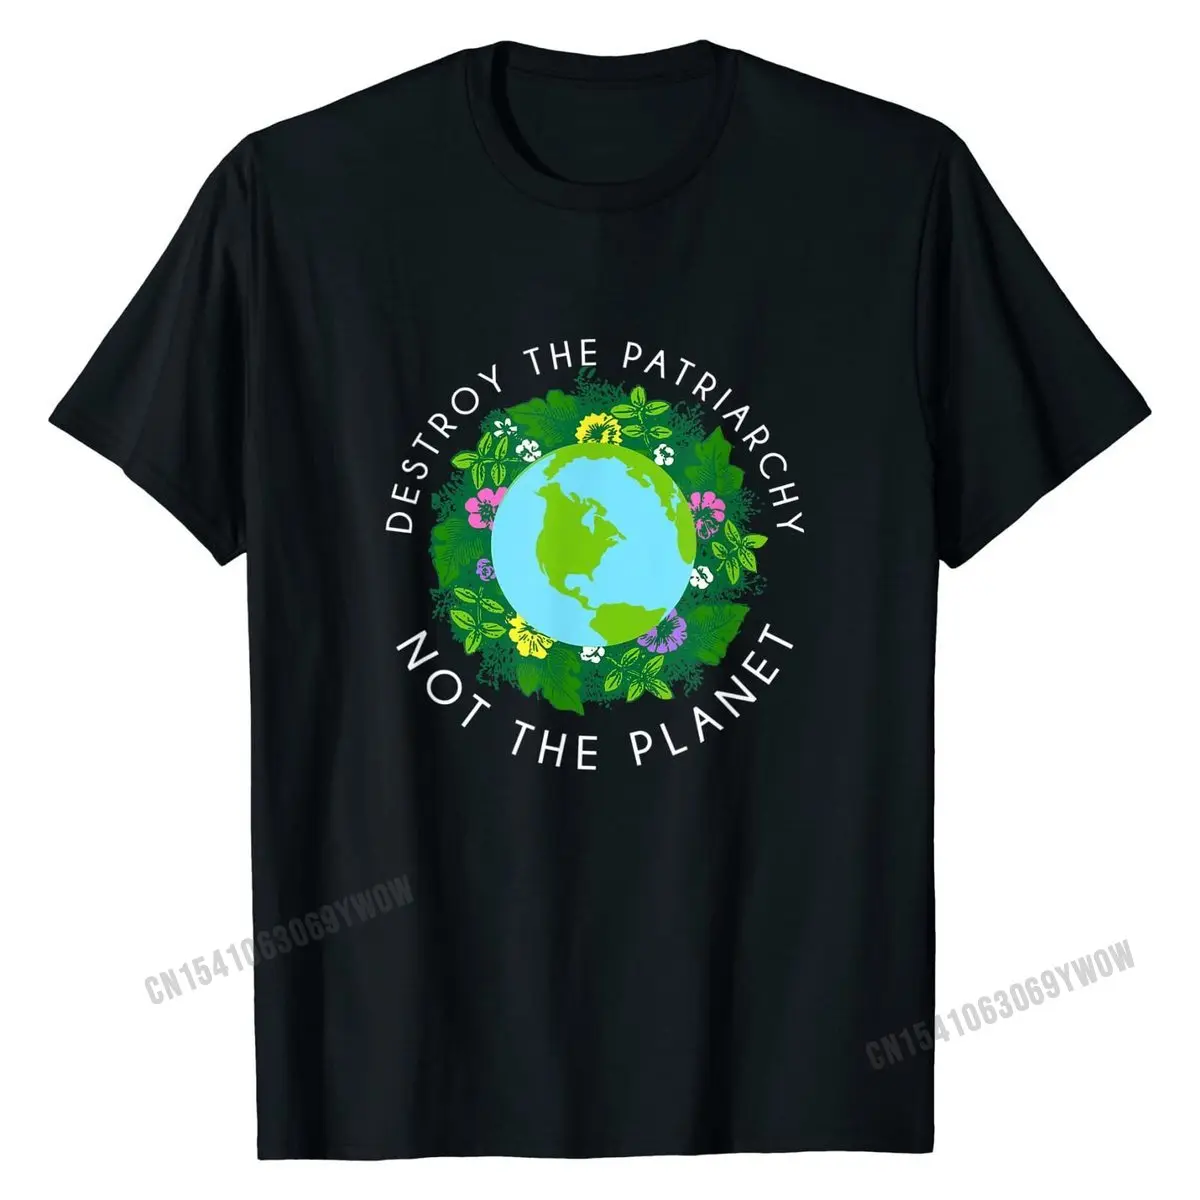 

Destroy Patriarchy Not Planet Shirt, Cute Feminist Earth Day Top T-shirts Party Discount Cotton Tops T Shirt Geek for Men